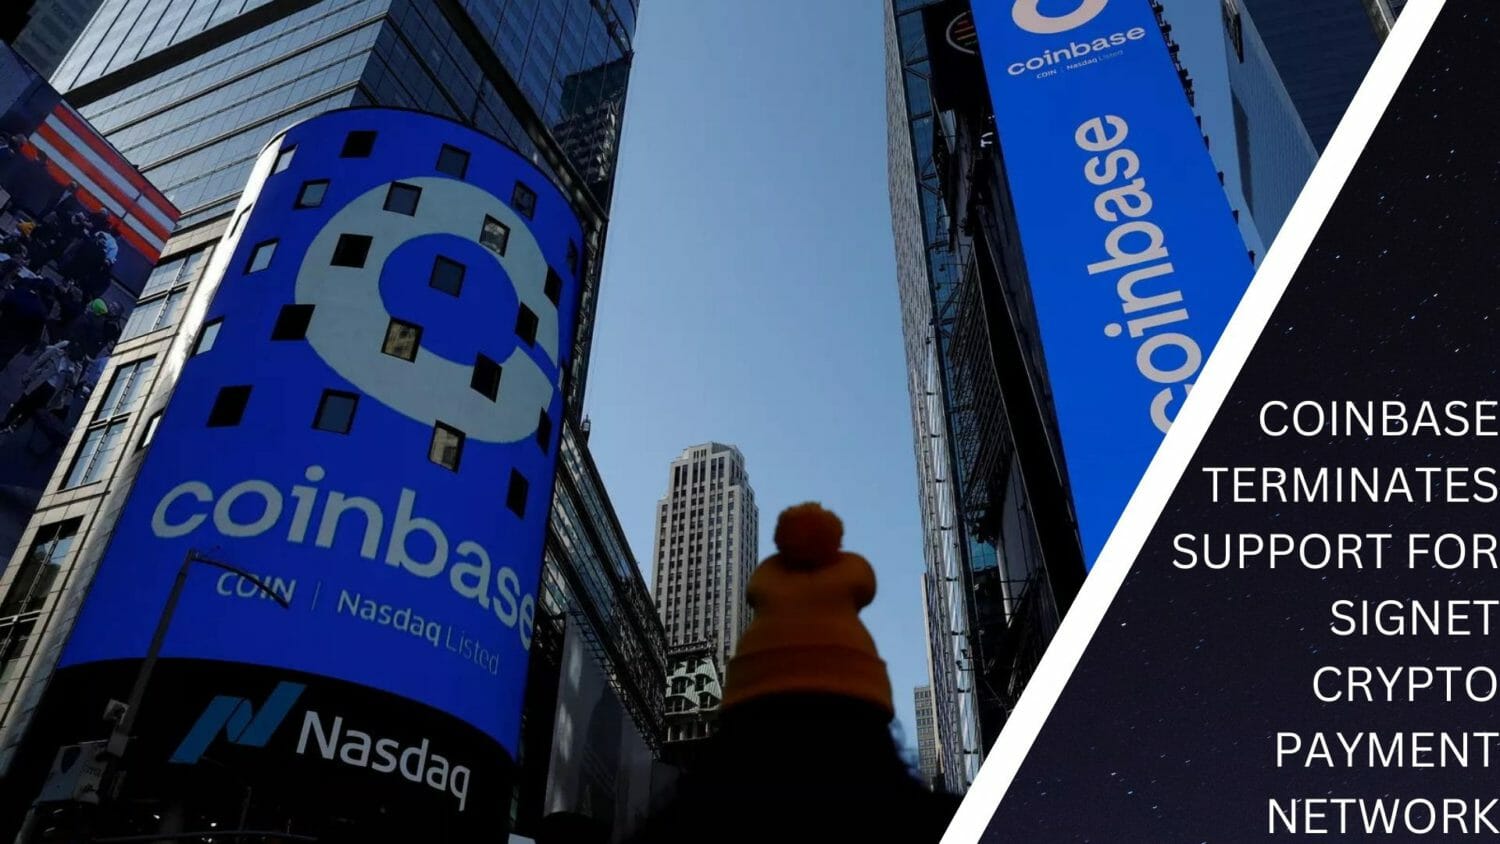 Coinbase Terminates Support For Signet Crypto Payment Network